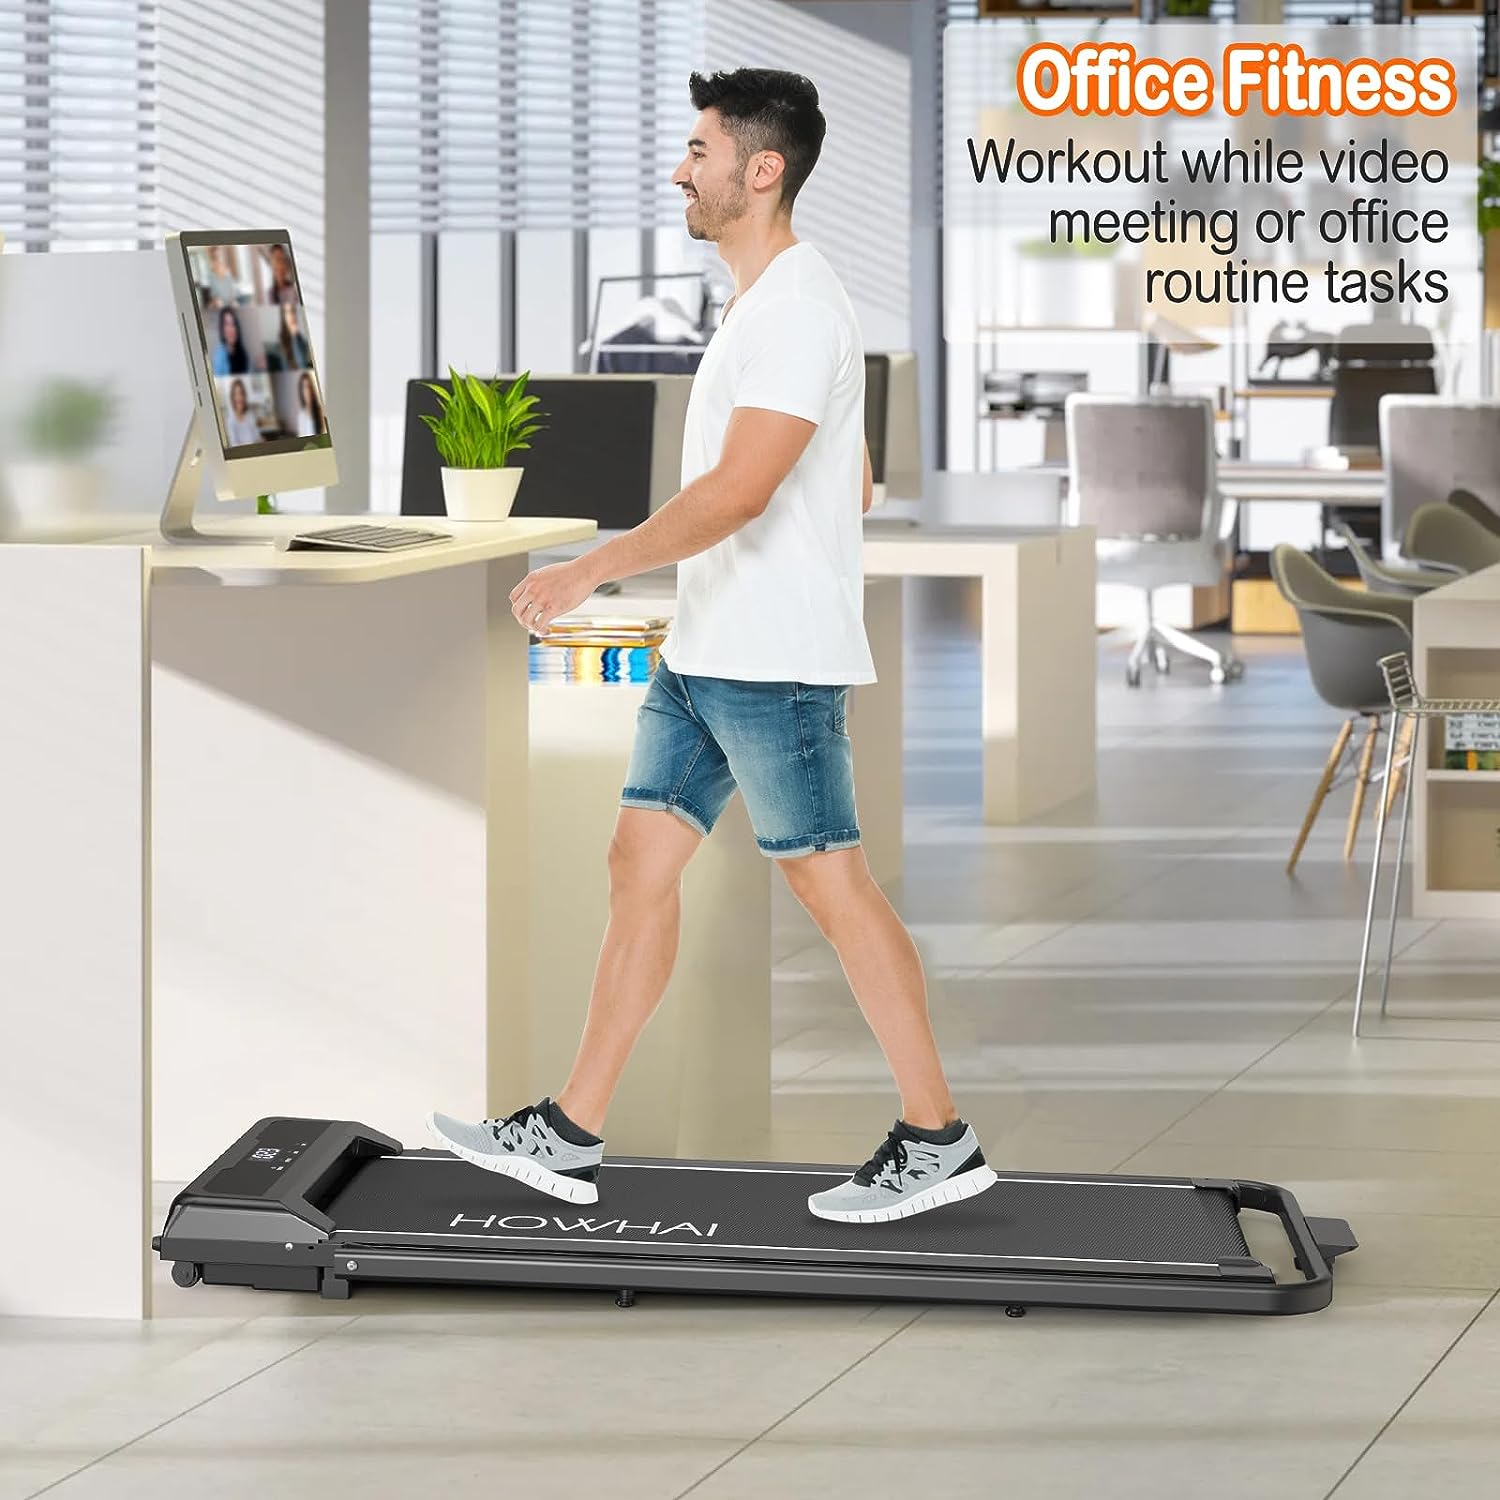 Walking Pad Treadmill, Under Desk Treadmill Foldable 2 in 1, 6.2 MPH Running Treadmill with Remote Control and LED Display, Running Machine for Home Office Use(Black/White)